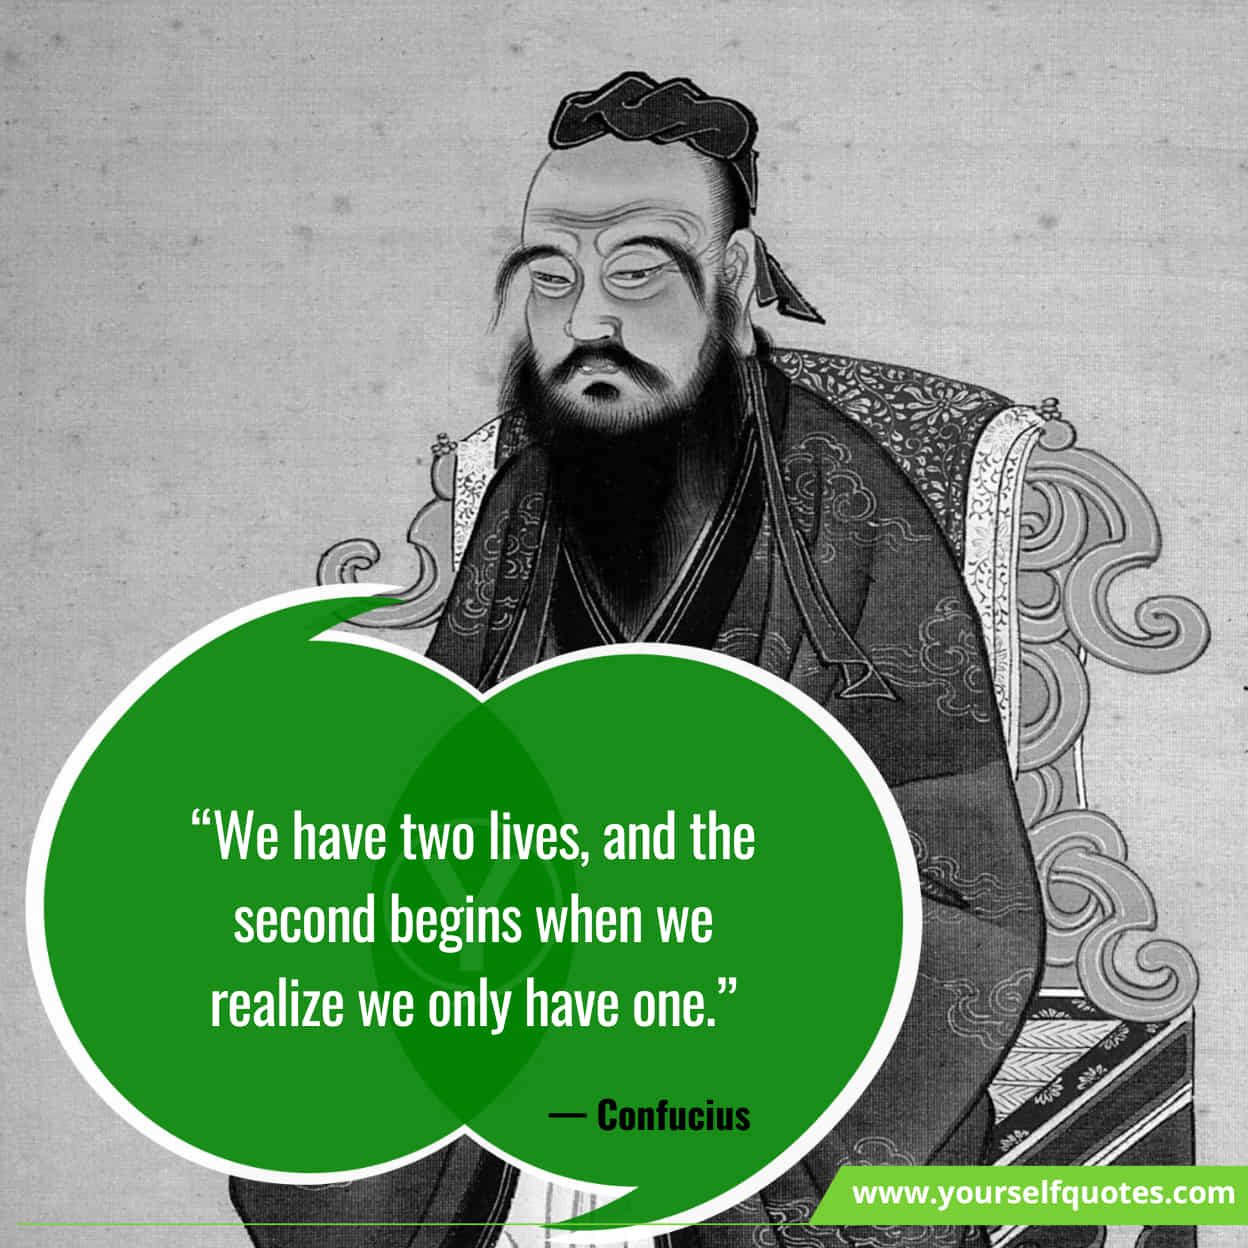 Famous Inspirational Quotes By Confucius 